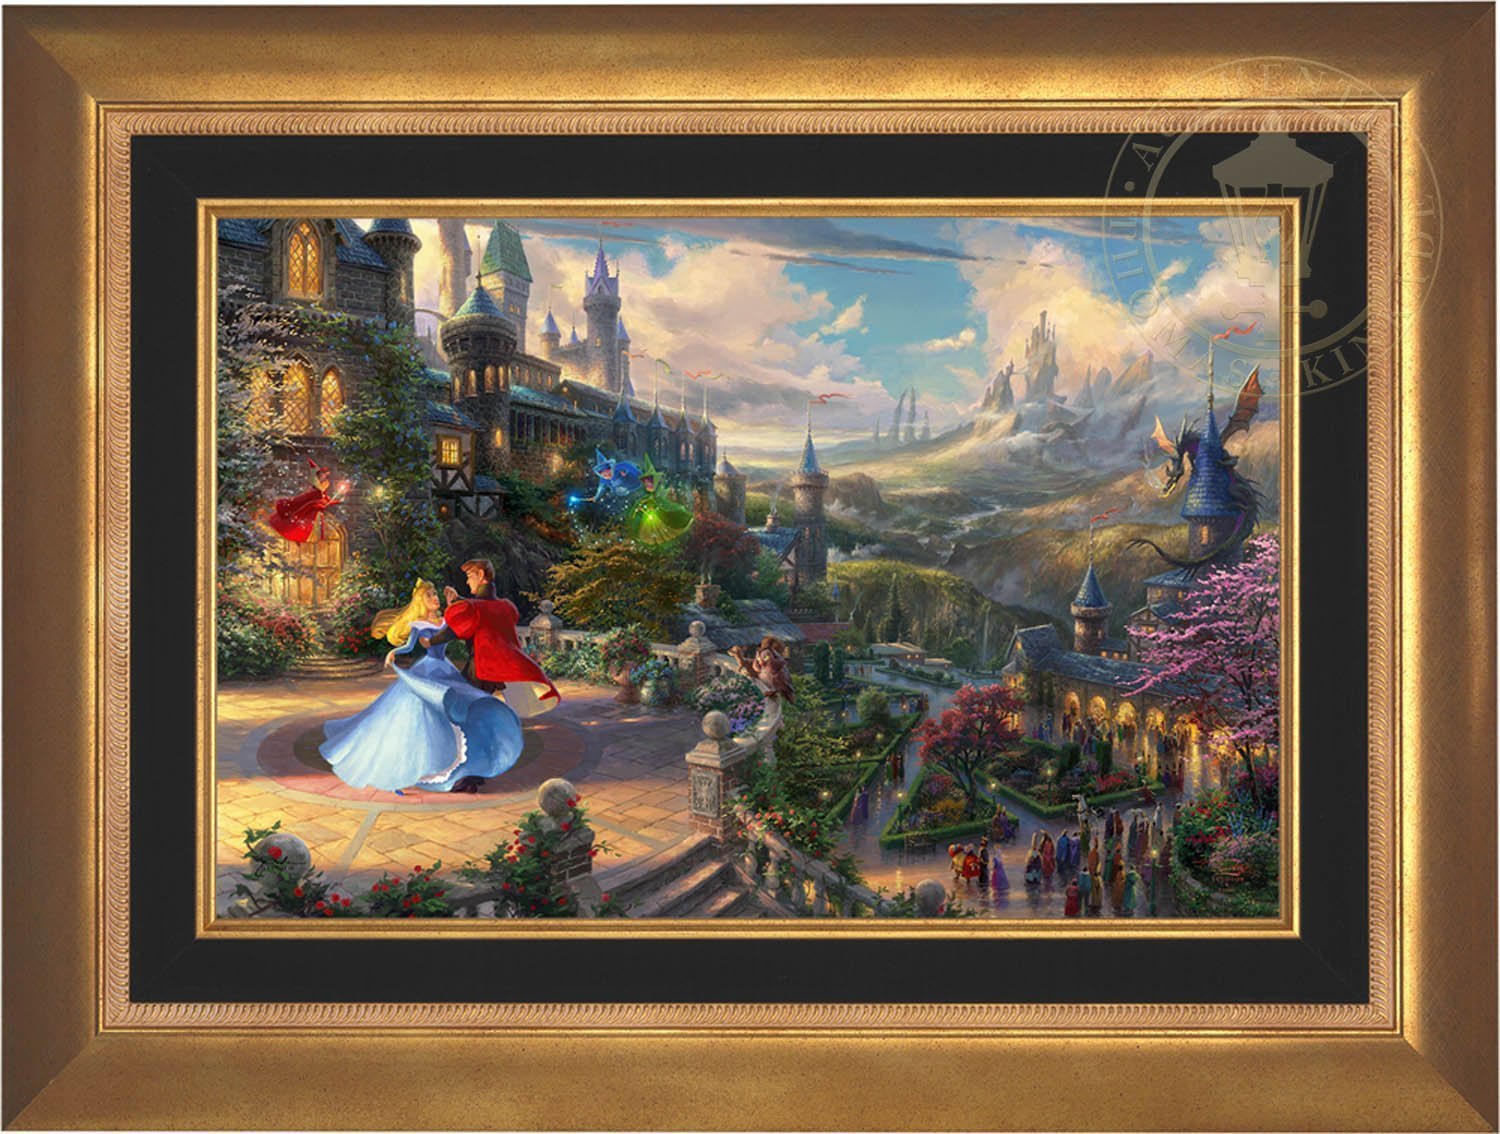 Prince Phillip has awakened Princess Aurora with true love’s kiss, dancing in courtyard under an enchanted light streaming down from the good fairies - Aurora Gold Frame